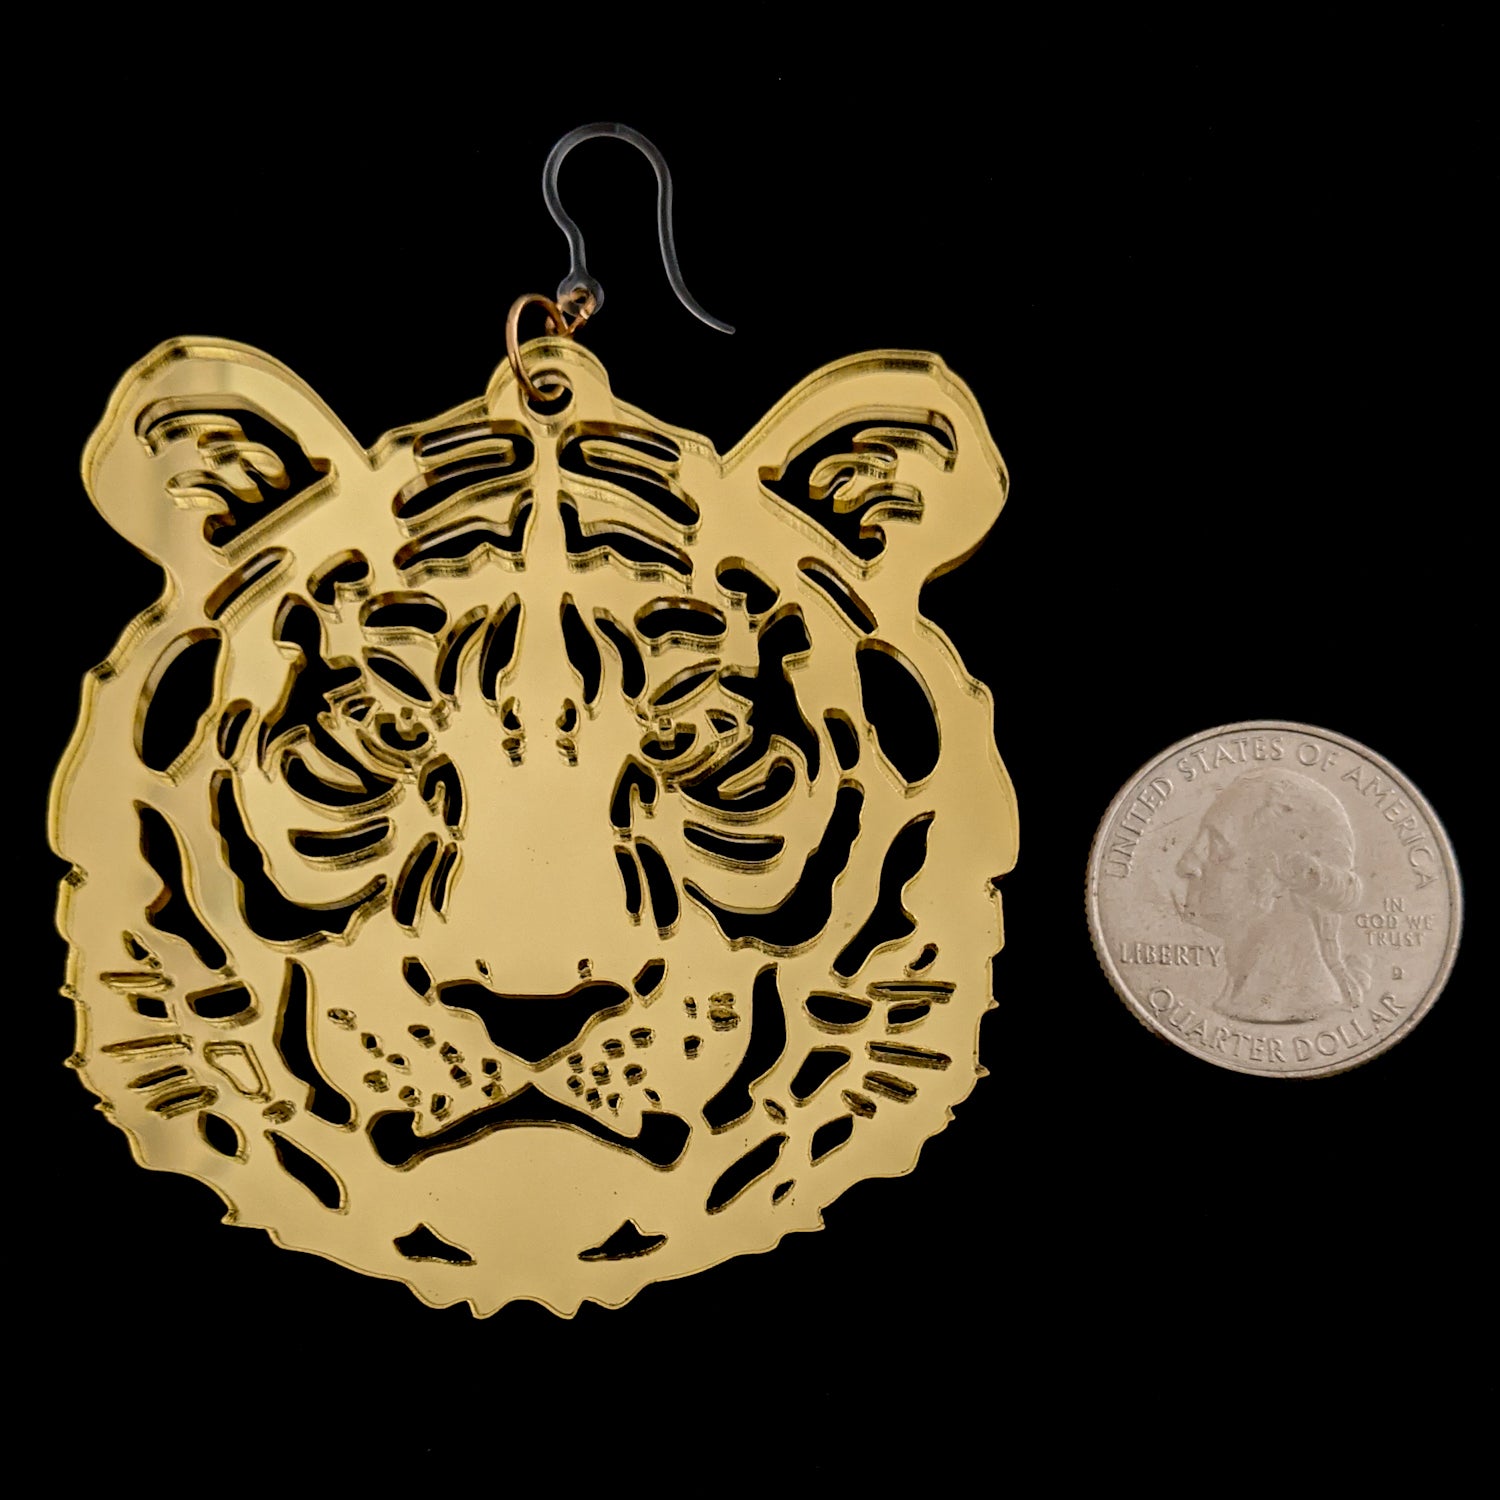 Exaggerated Tiger Earrings (Dangles) - size comparison quarter